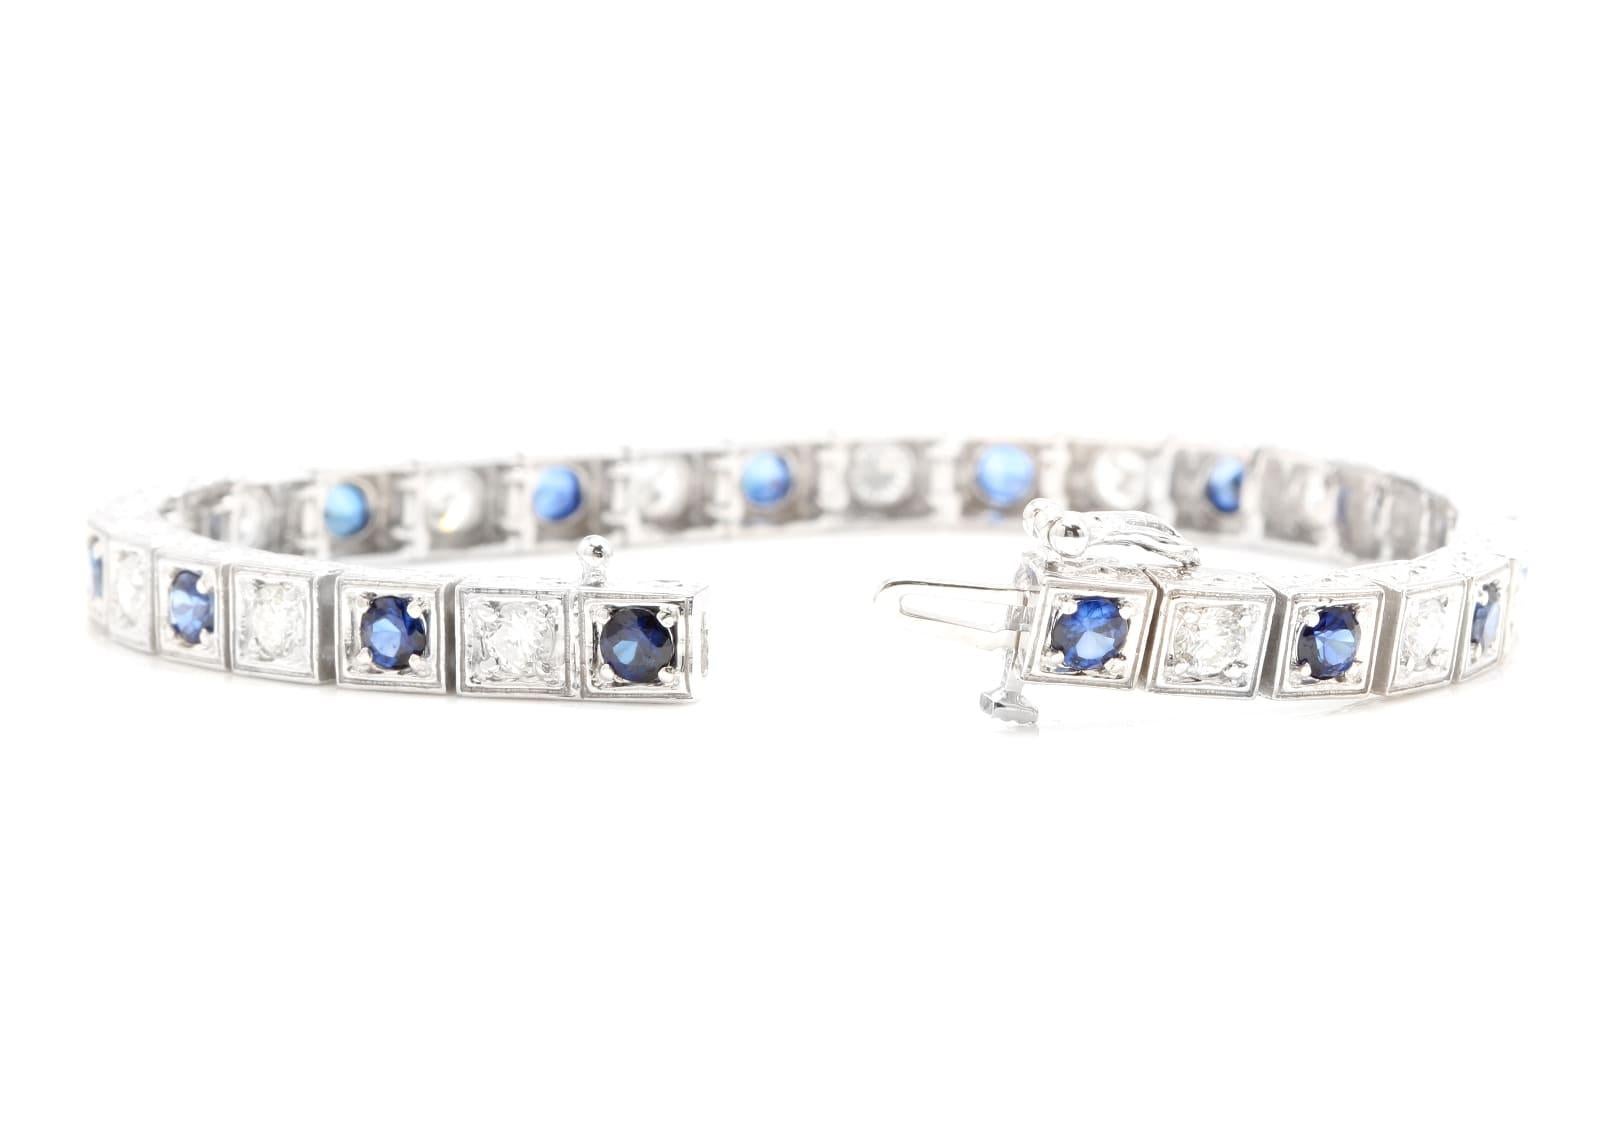 Very Impressive 4.80 Carats Natural Sapphire & Diamond 14K Solid White Gold Bracelet 

Suggested Replacement Value: $8,000.00

STAMPED: 14K

Total Natural Round Diamonds Weight: Approx. 2.30 Carats (color G-H / Clarity SI1-SI2)

Total Natural